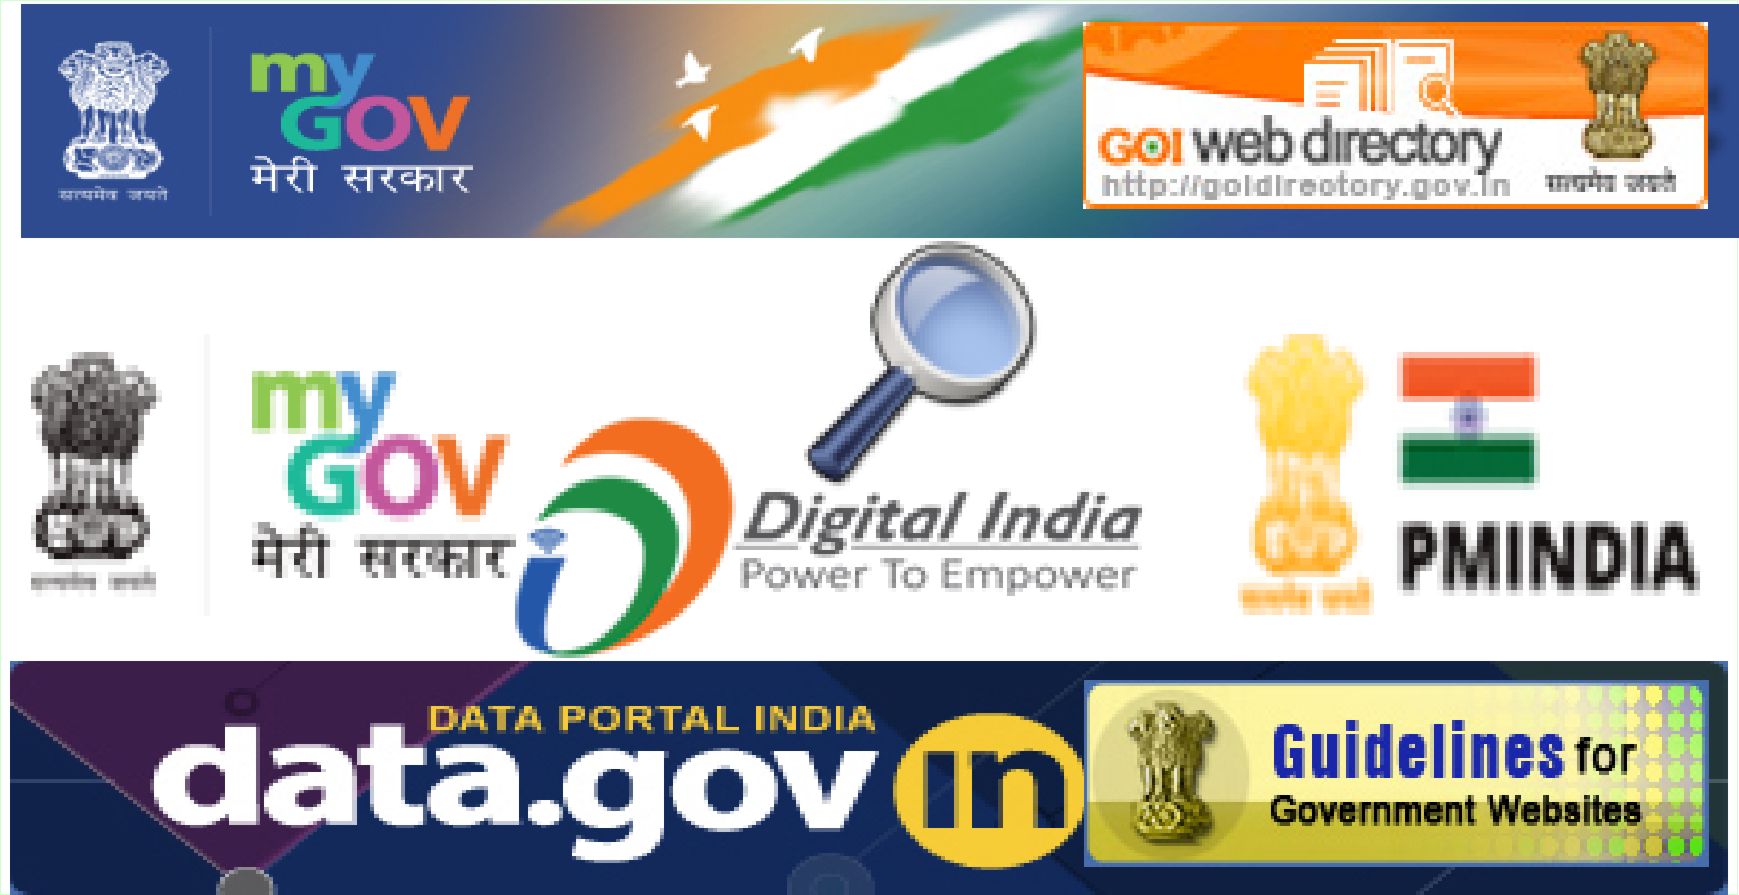 India Gov. Search Engines